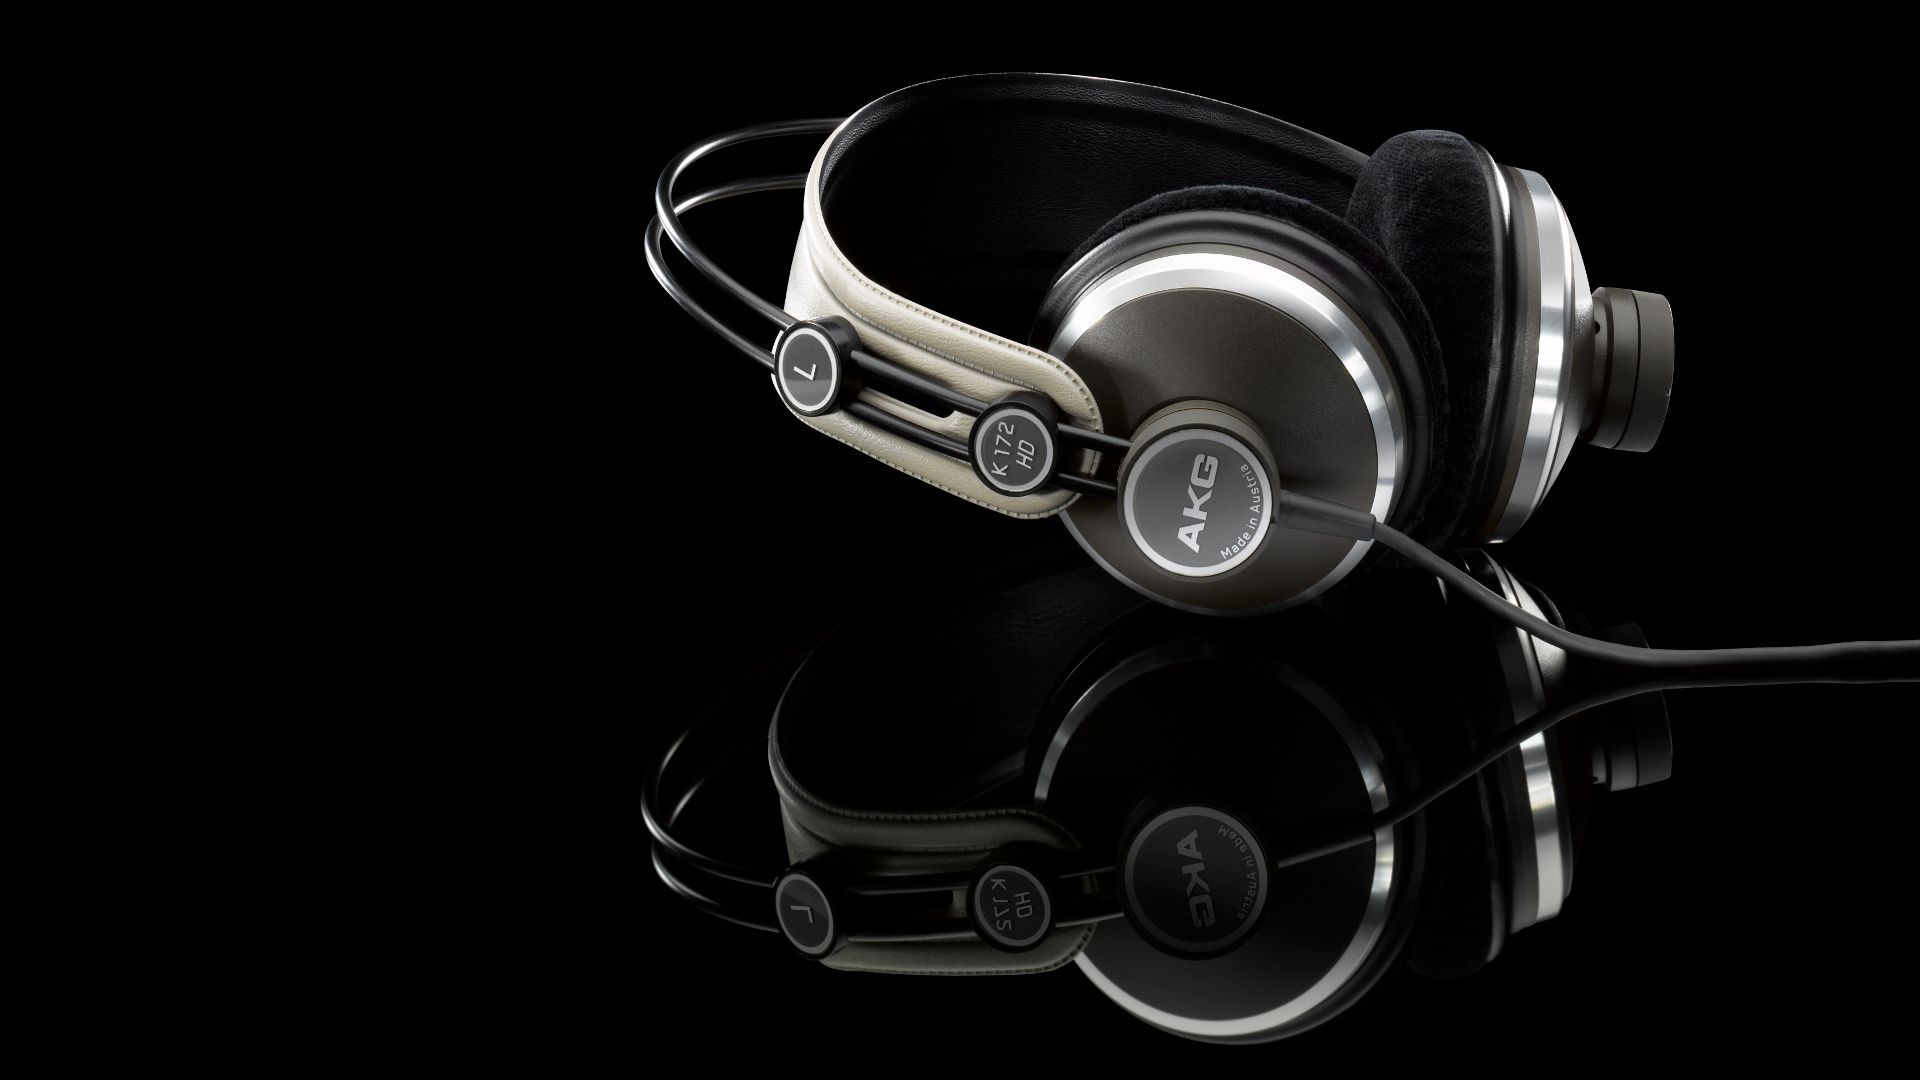 Headphone HD Wallpaper On Picture Image For Smartphone